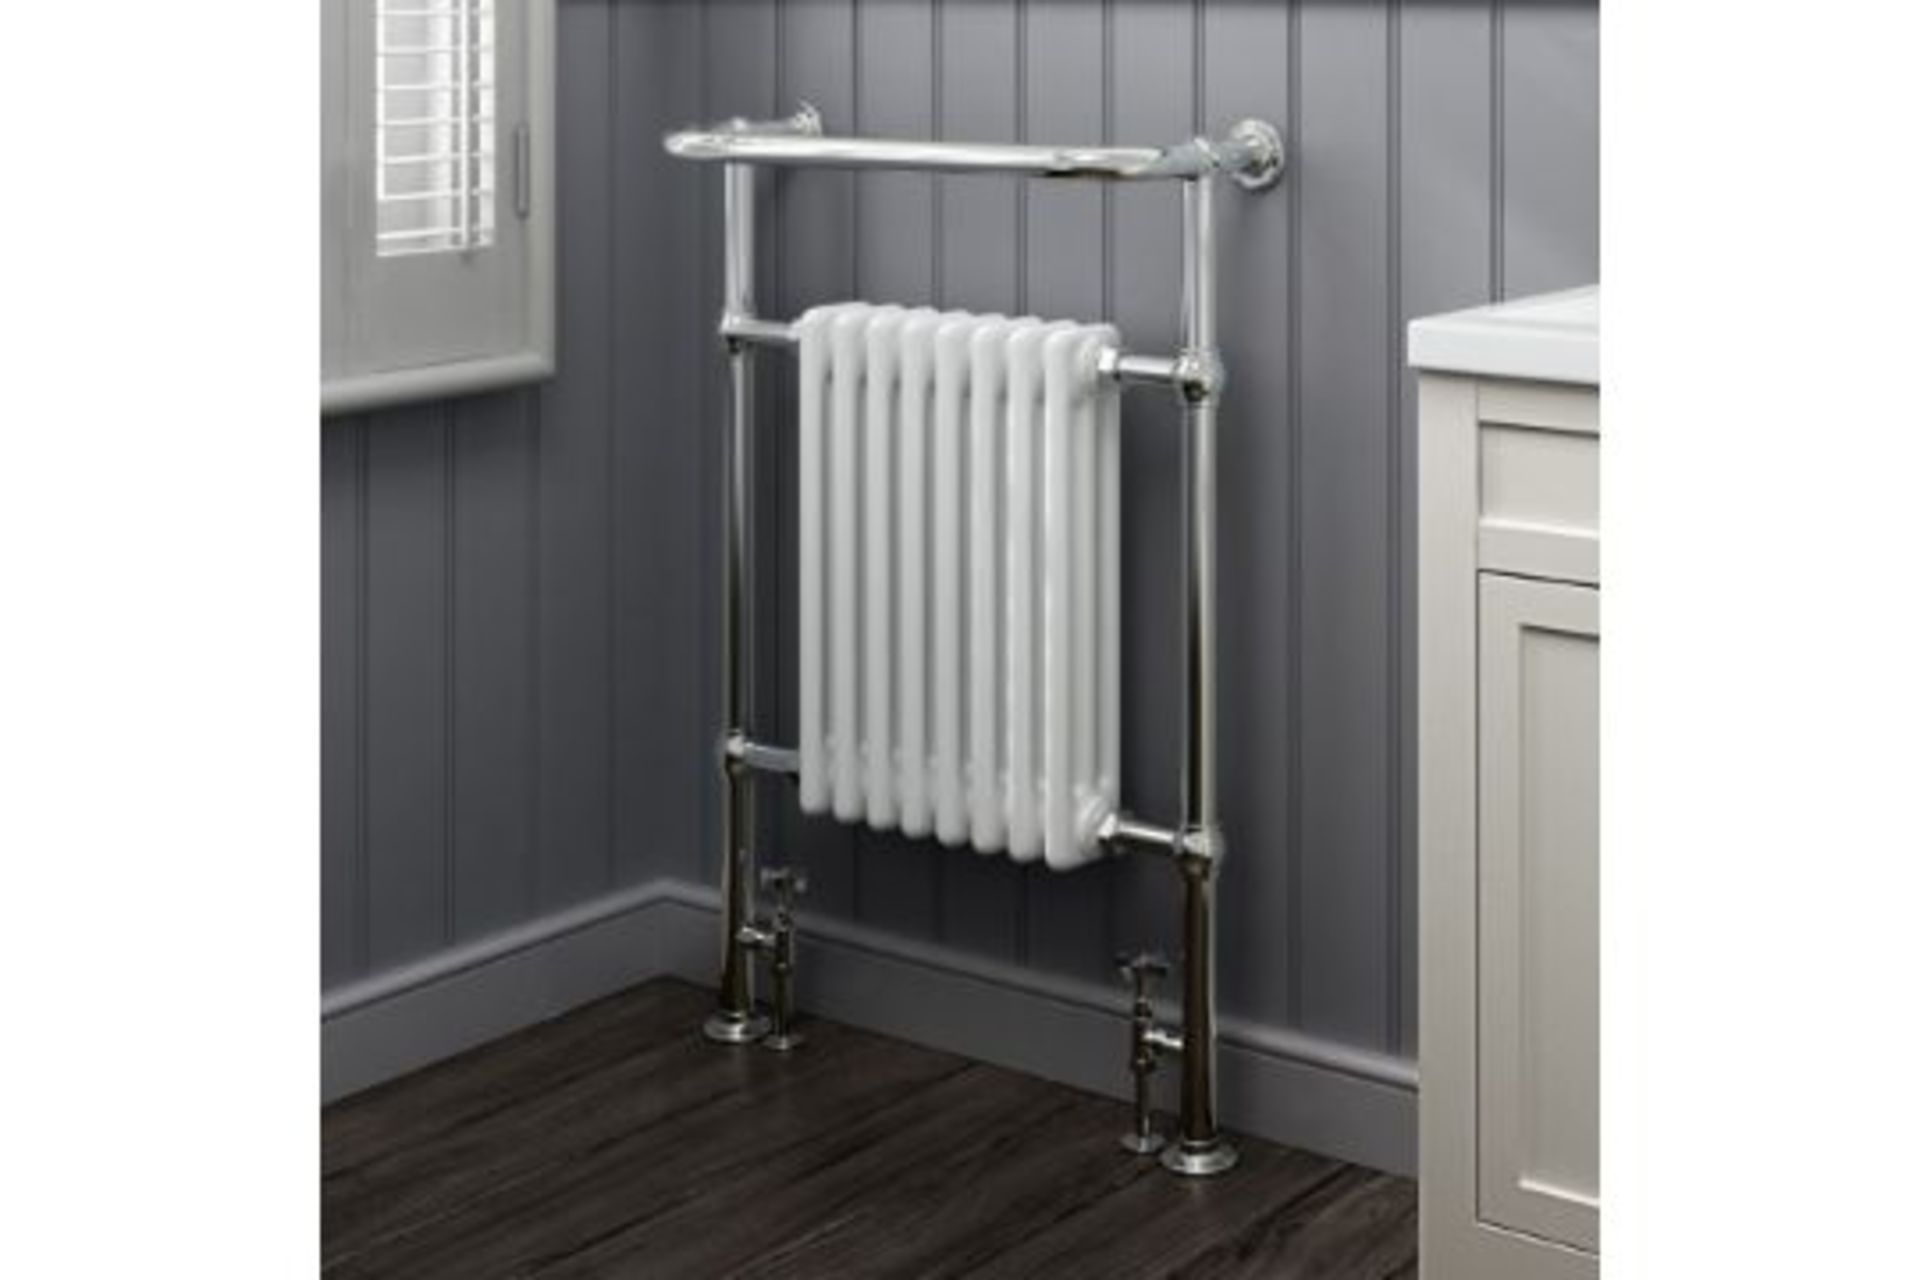 BRAND NEW BOXED 952x659mm Large Traditional White Premium Towel Rail Radiator.RRP £499.99.We l... - Image 3 of 3